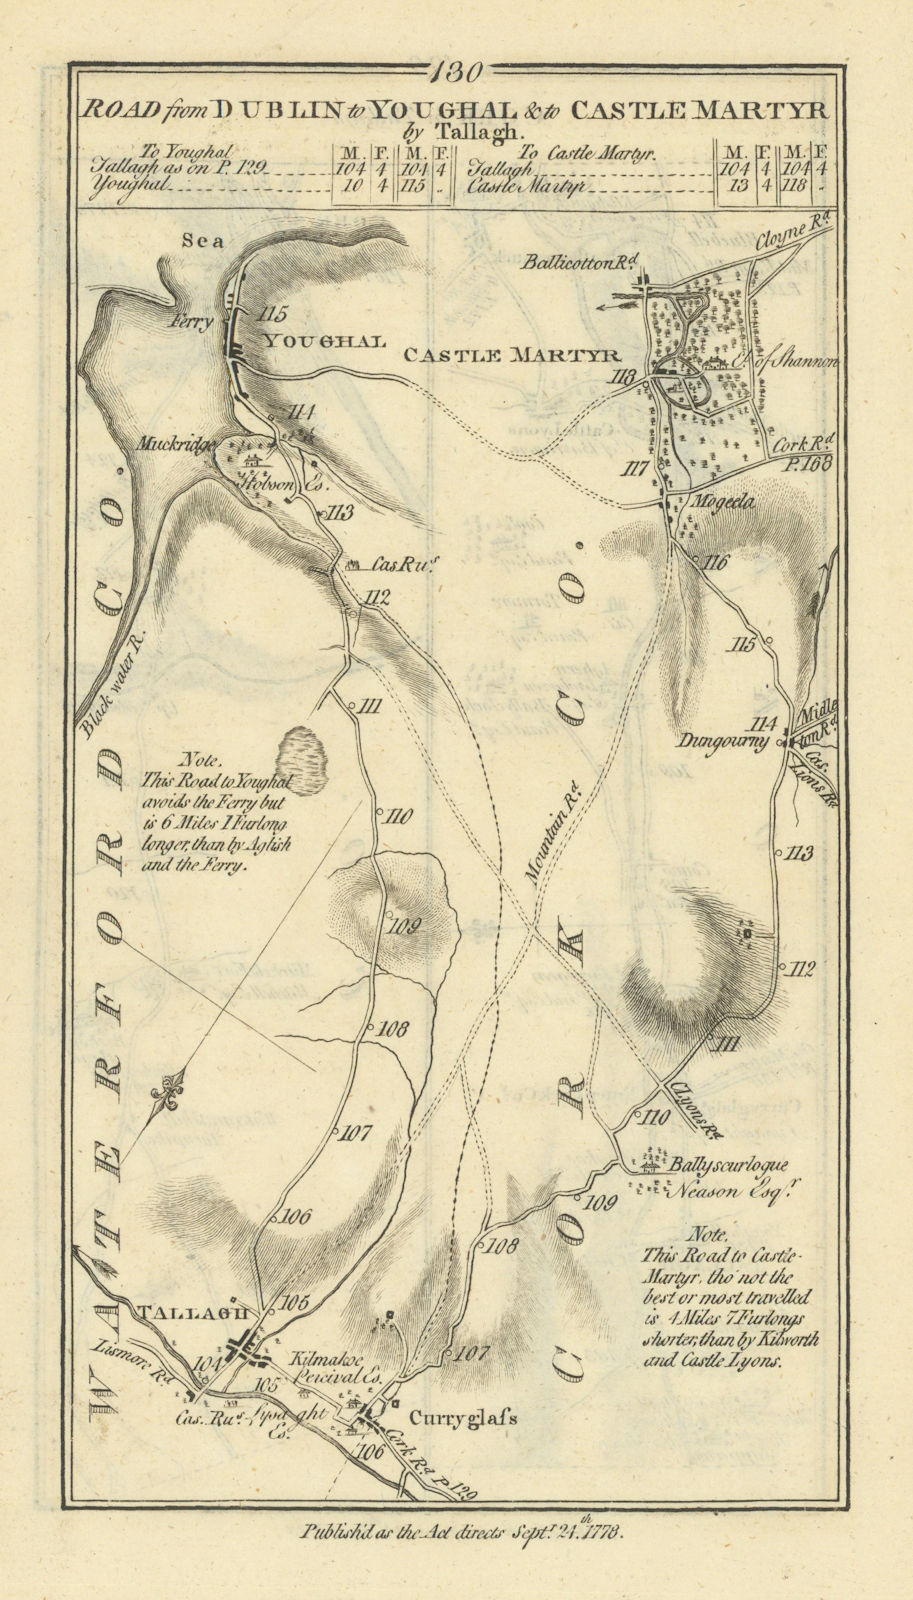 Associate Product #130 to Youghal & Castlemartyr by Tallow. Curraglass. TAYLOR/SKINNER 1778 map